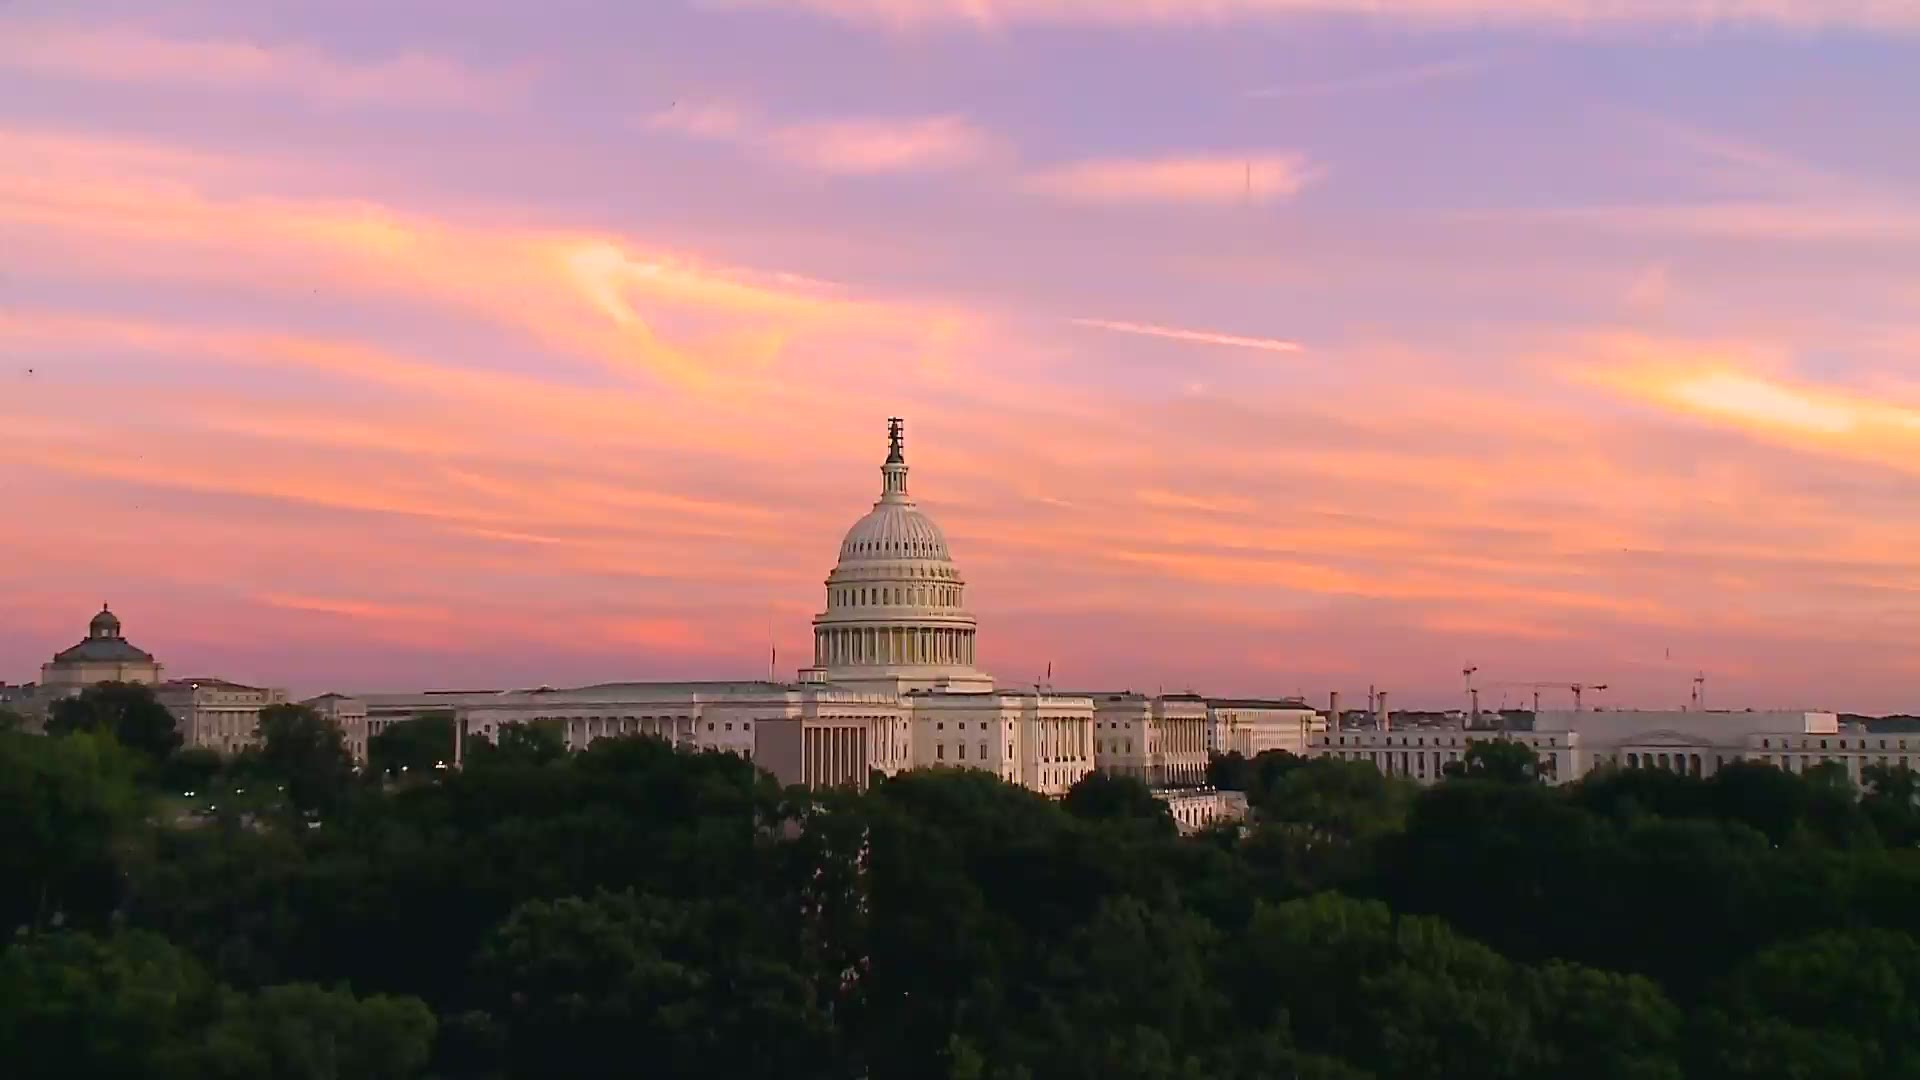 It was an odd, tough week in Washington, DC. But this is how it ends, with a beautiful sunset over the nation's capital.